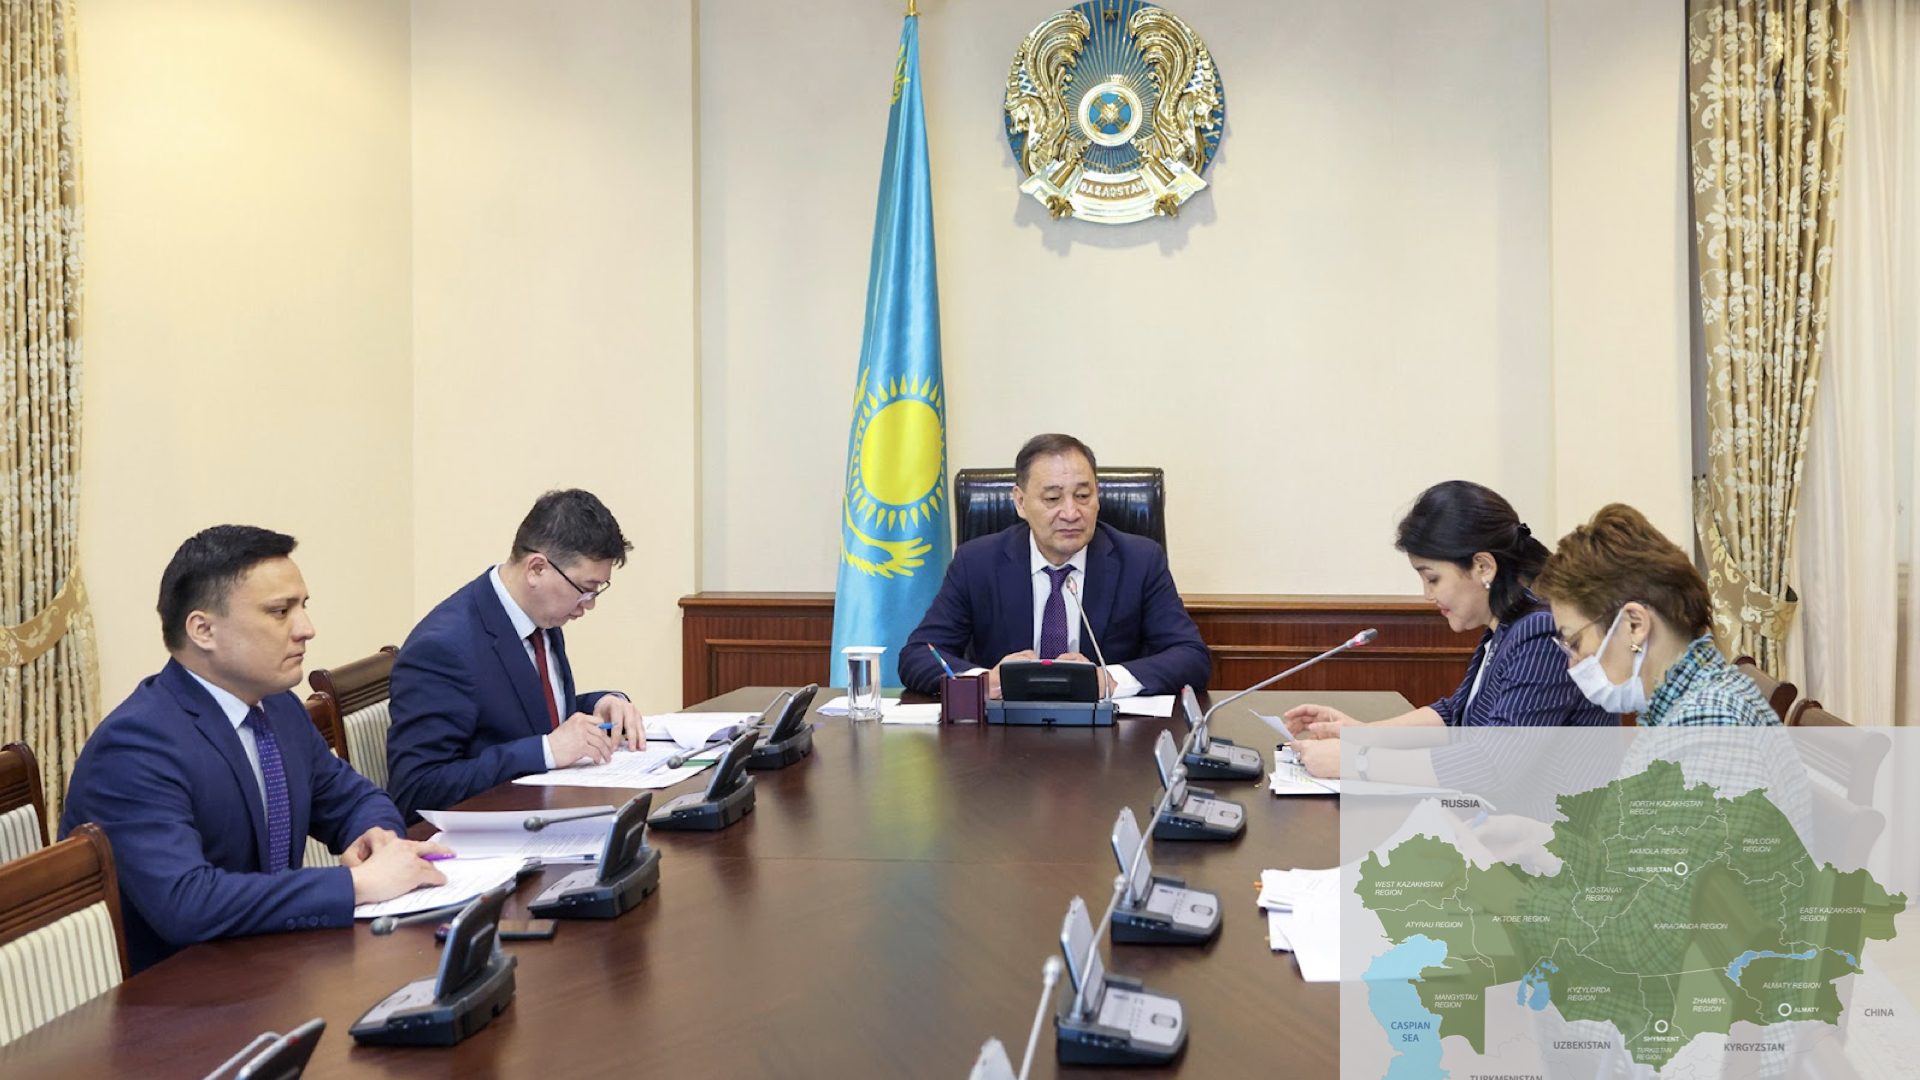 Kazakhstan to Lift Restrictions at Border Checkpoints with Kyrgyzstan, Russia and Uzbekistan Next Week - The Astana Times